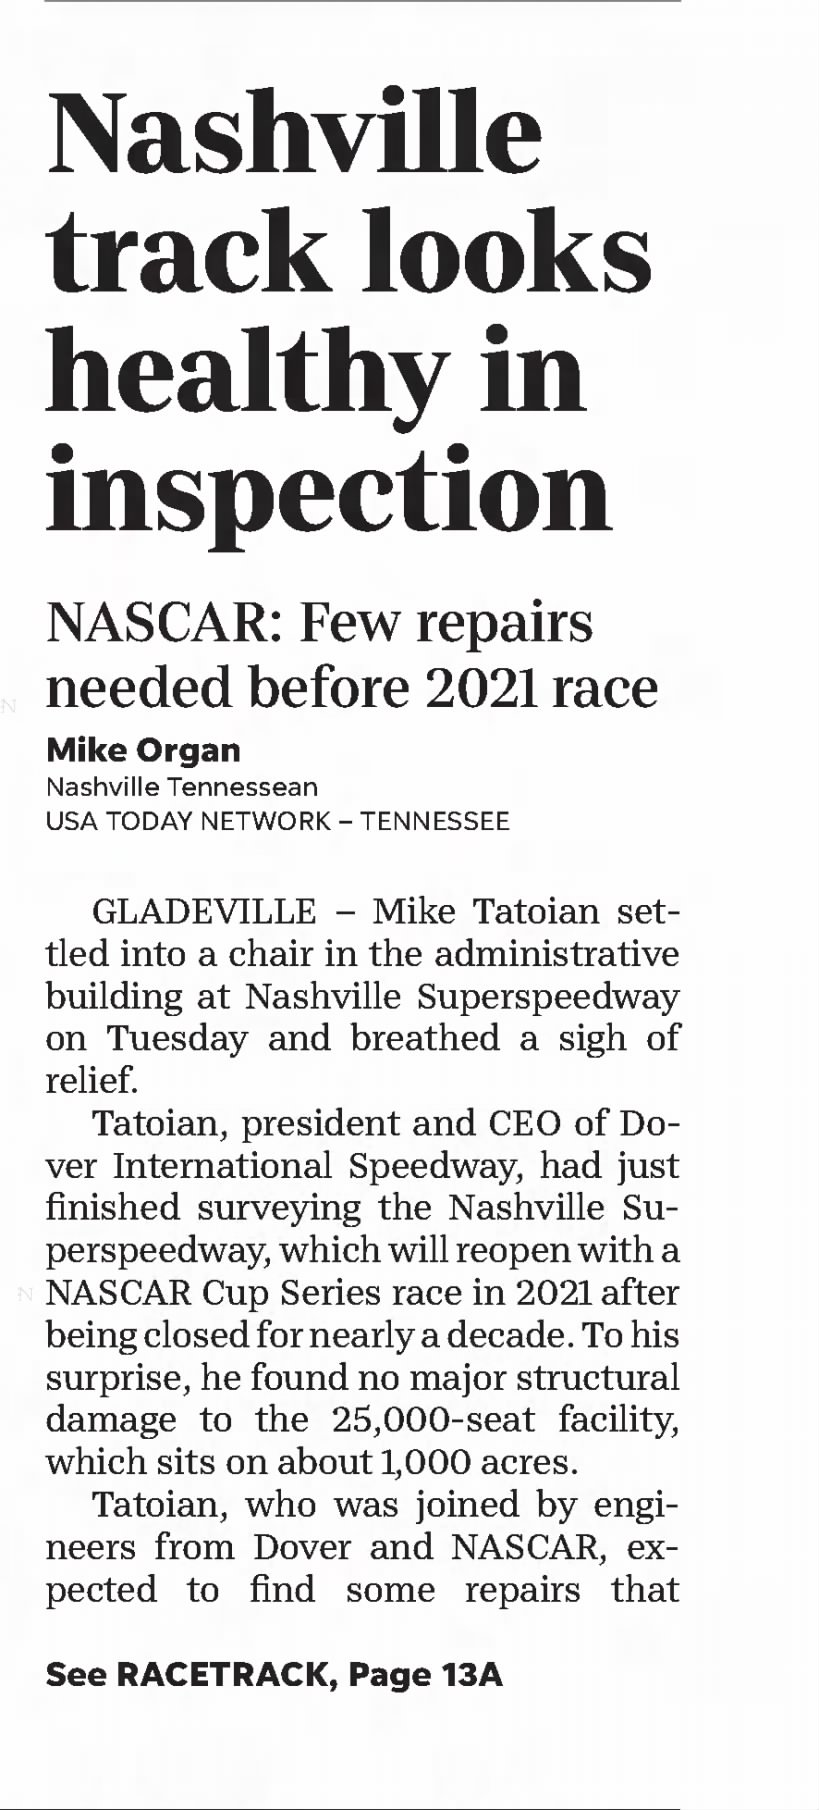 Nashville track looks healthy in inspection (Part 1)